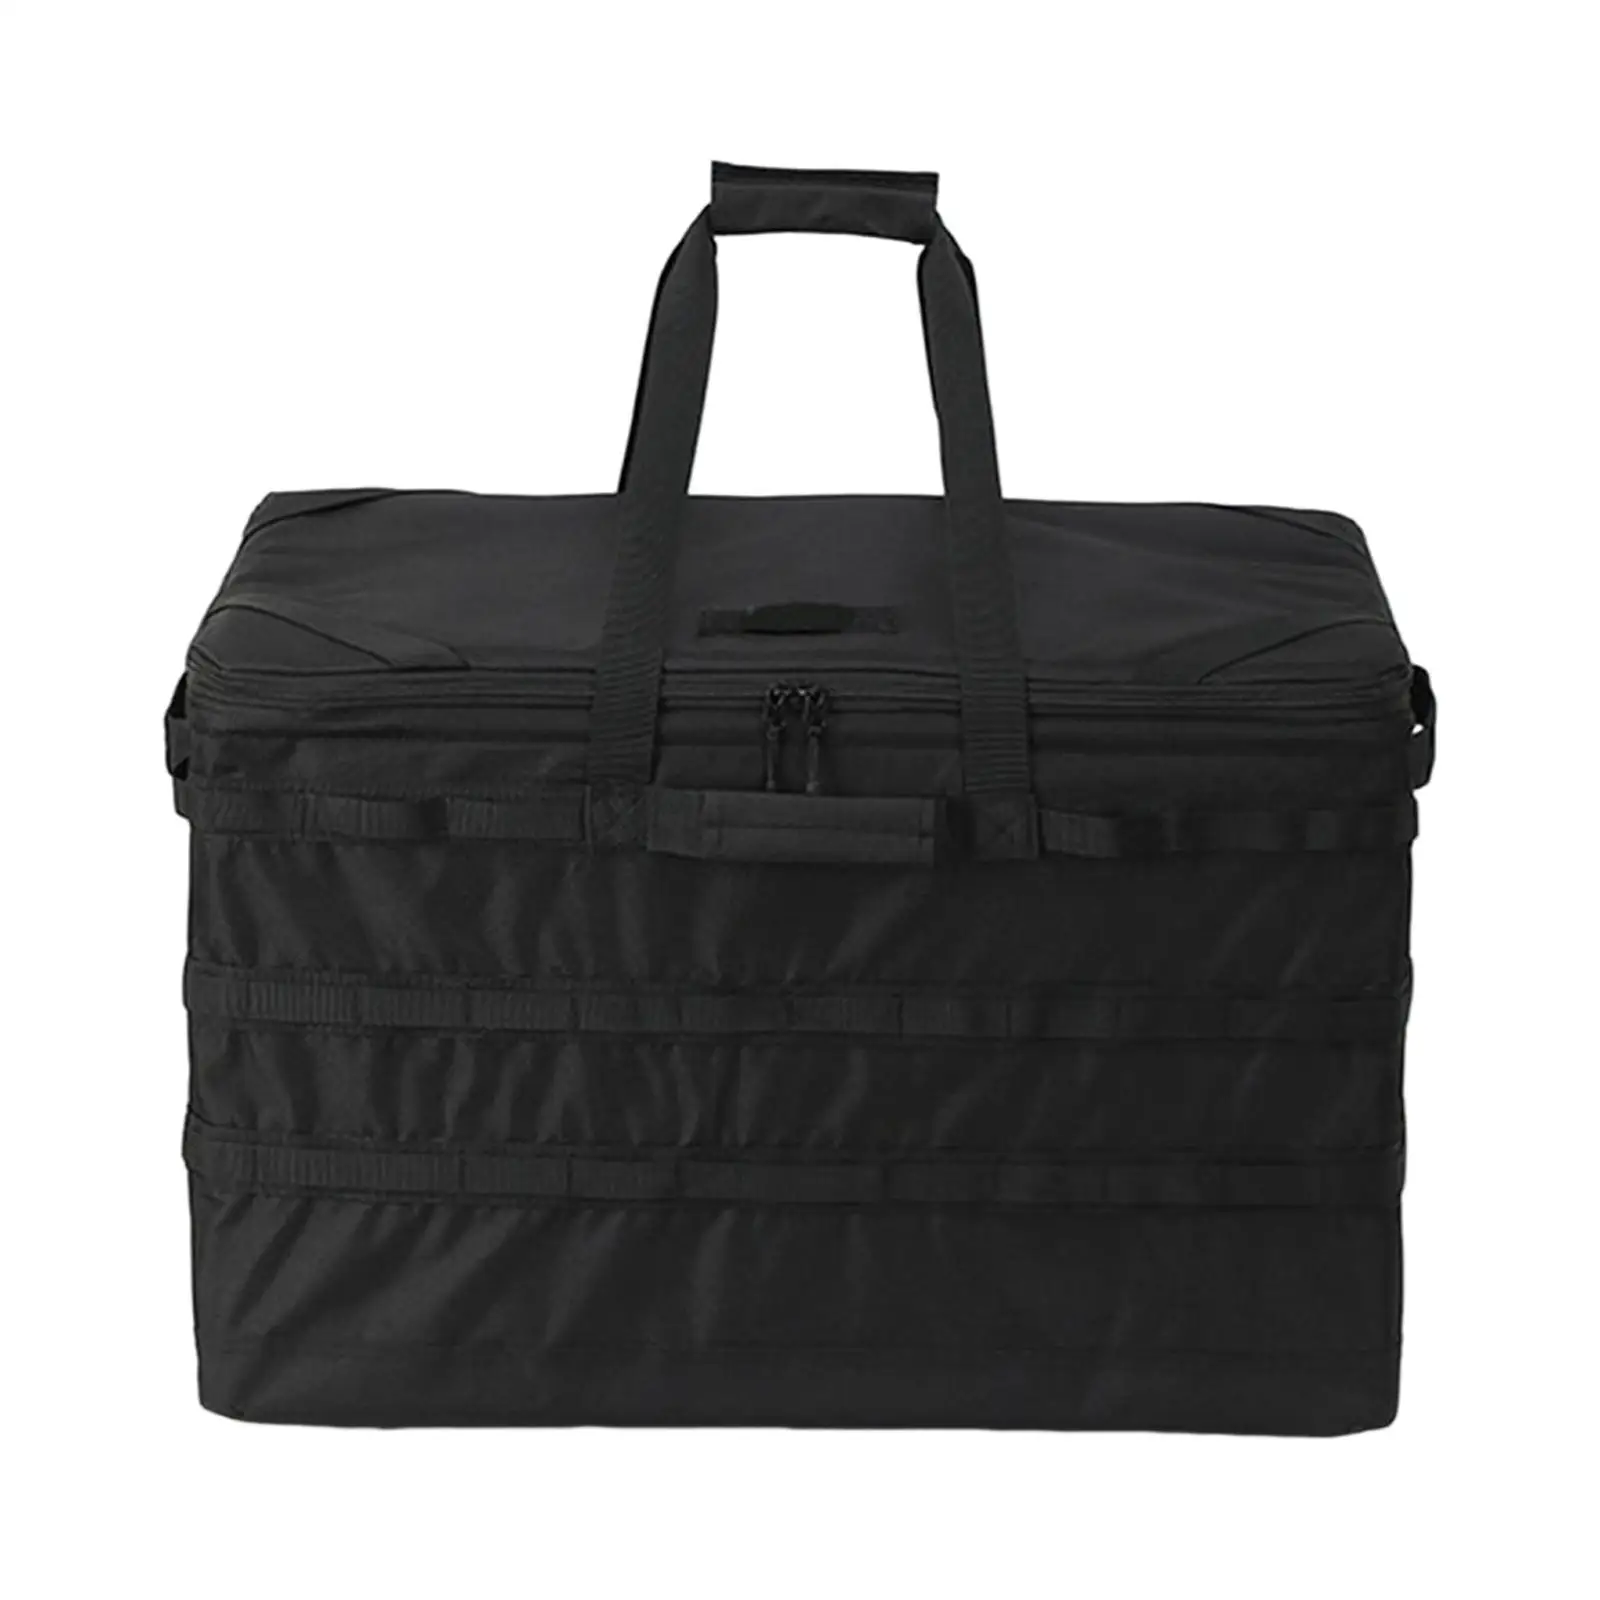 Camping Storage Bag Large Capacity with Dividers with Handles Utility Tote